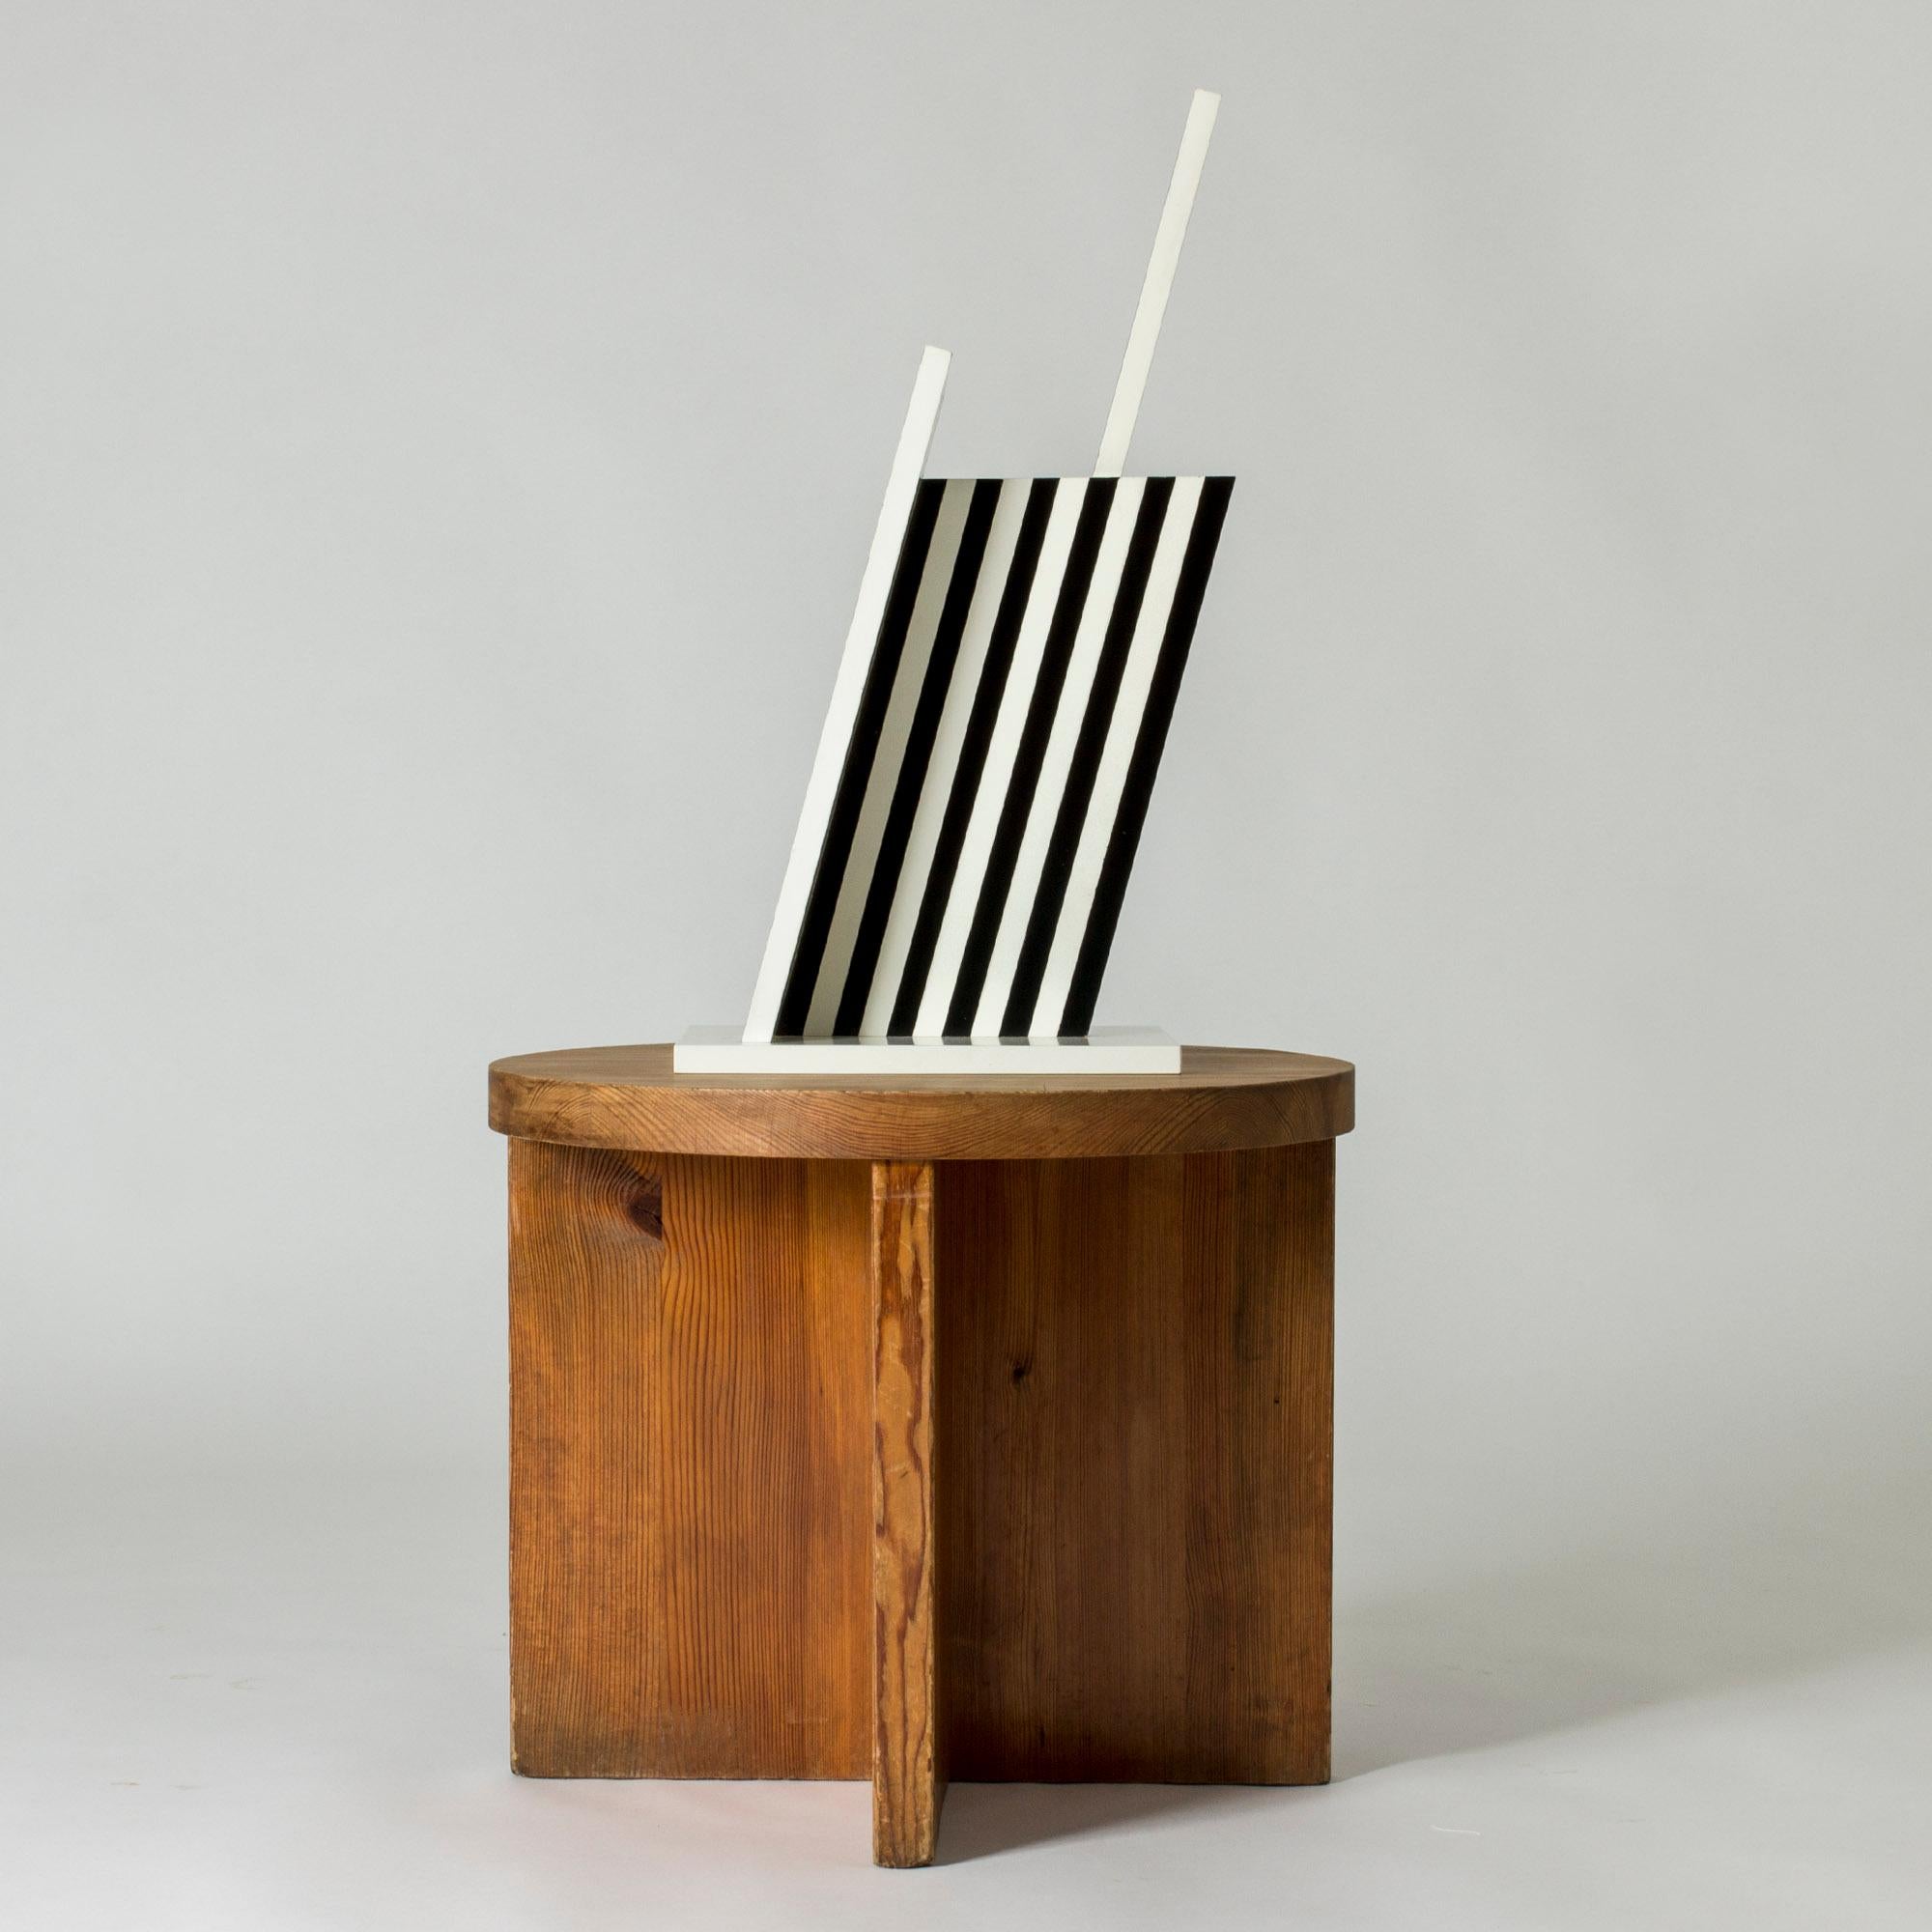 Striking sculpture by Lars Erik Falk, made from composite wood and tilted at Falk’s signature 73 degrees. Painted in a distinct pattern of black and white stripes.

Lars Erik Falk (1922-1918) was one of Sweden’s foremost constructivists. He was a